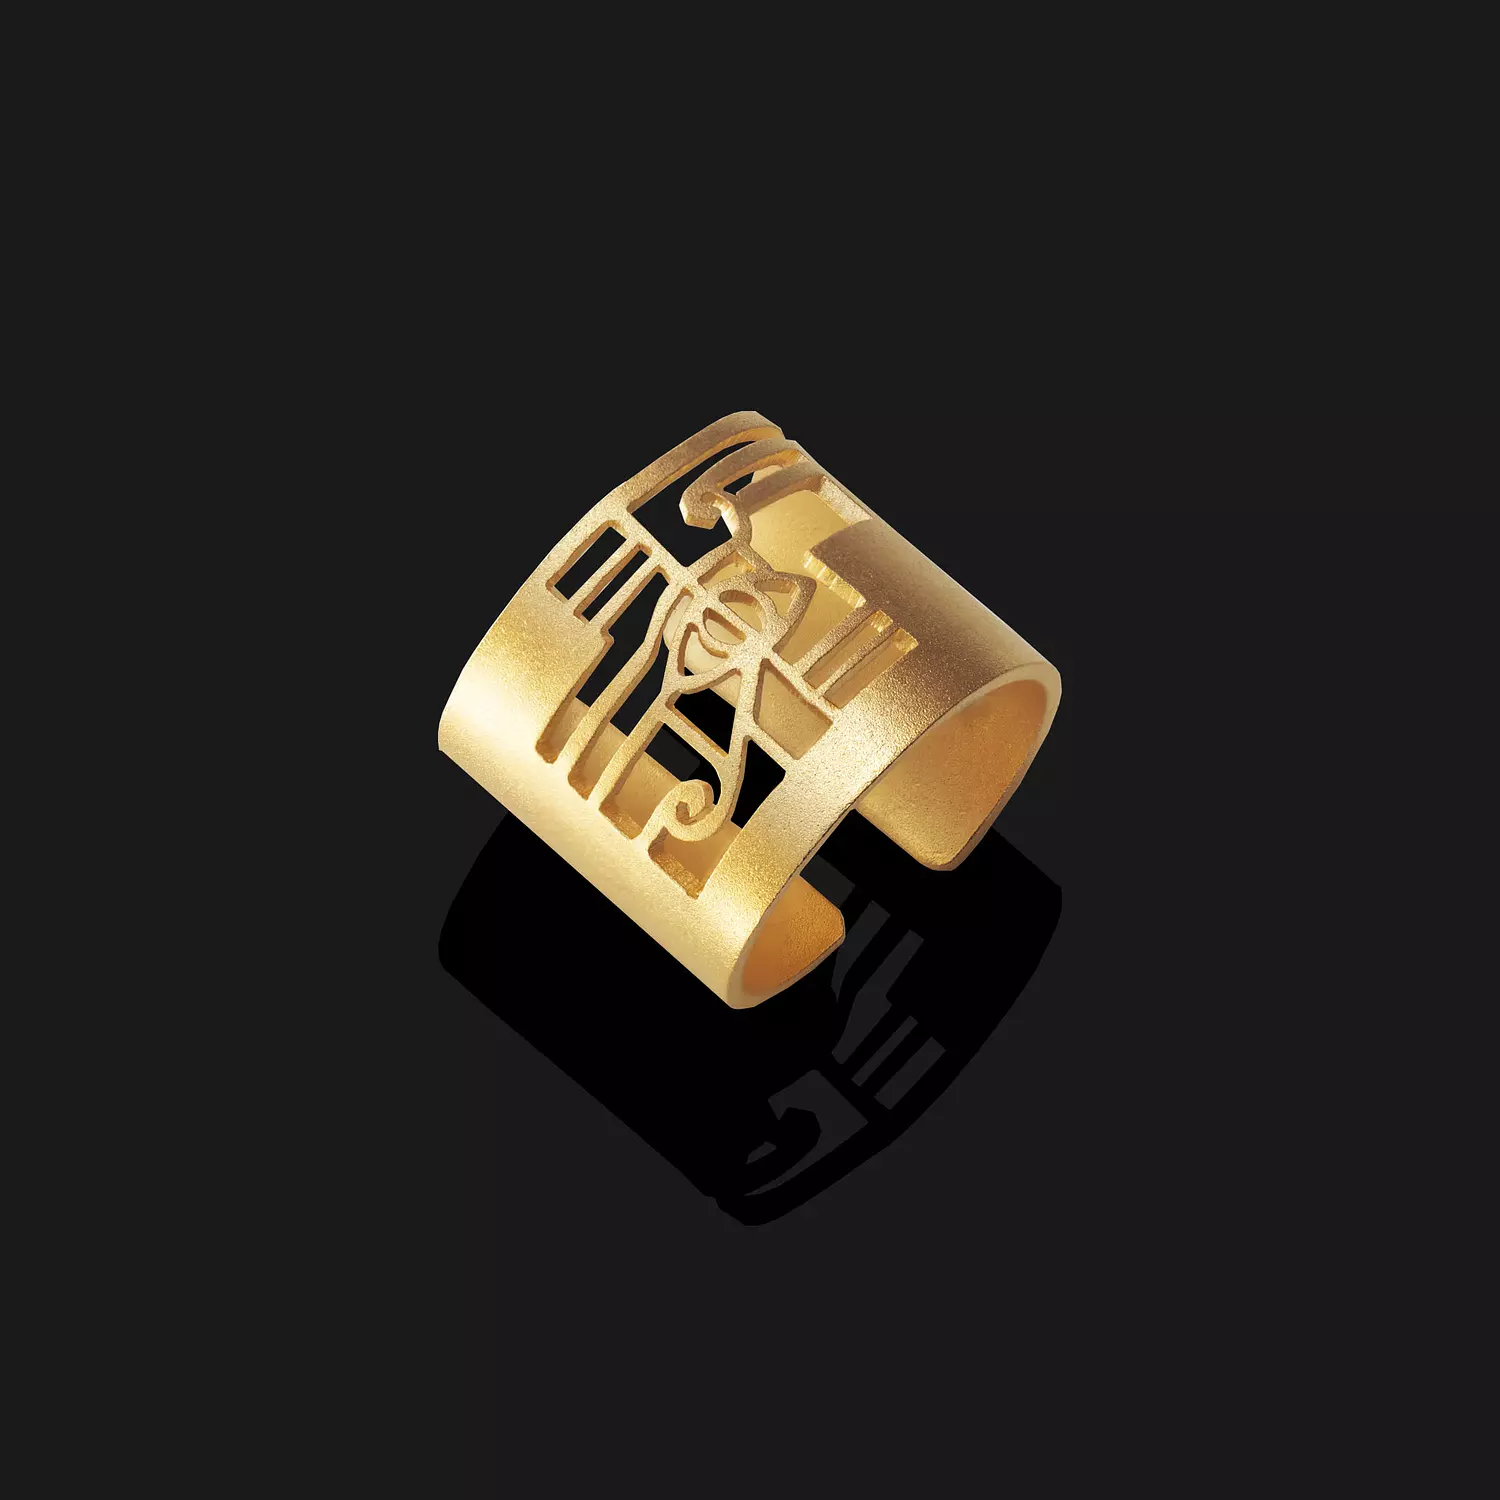 Eye of horus ring hover image